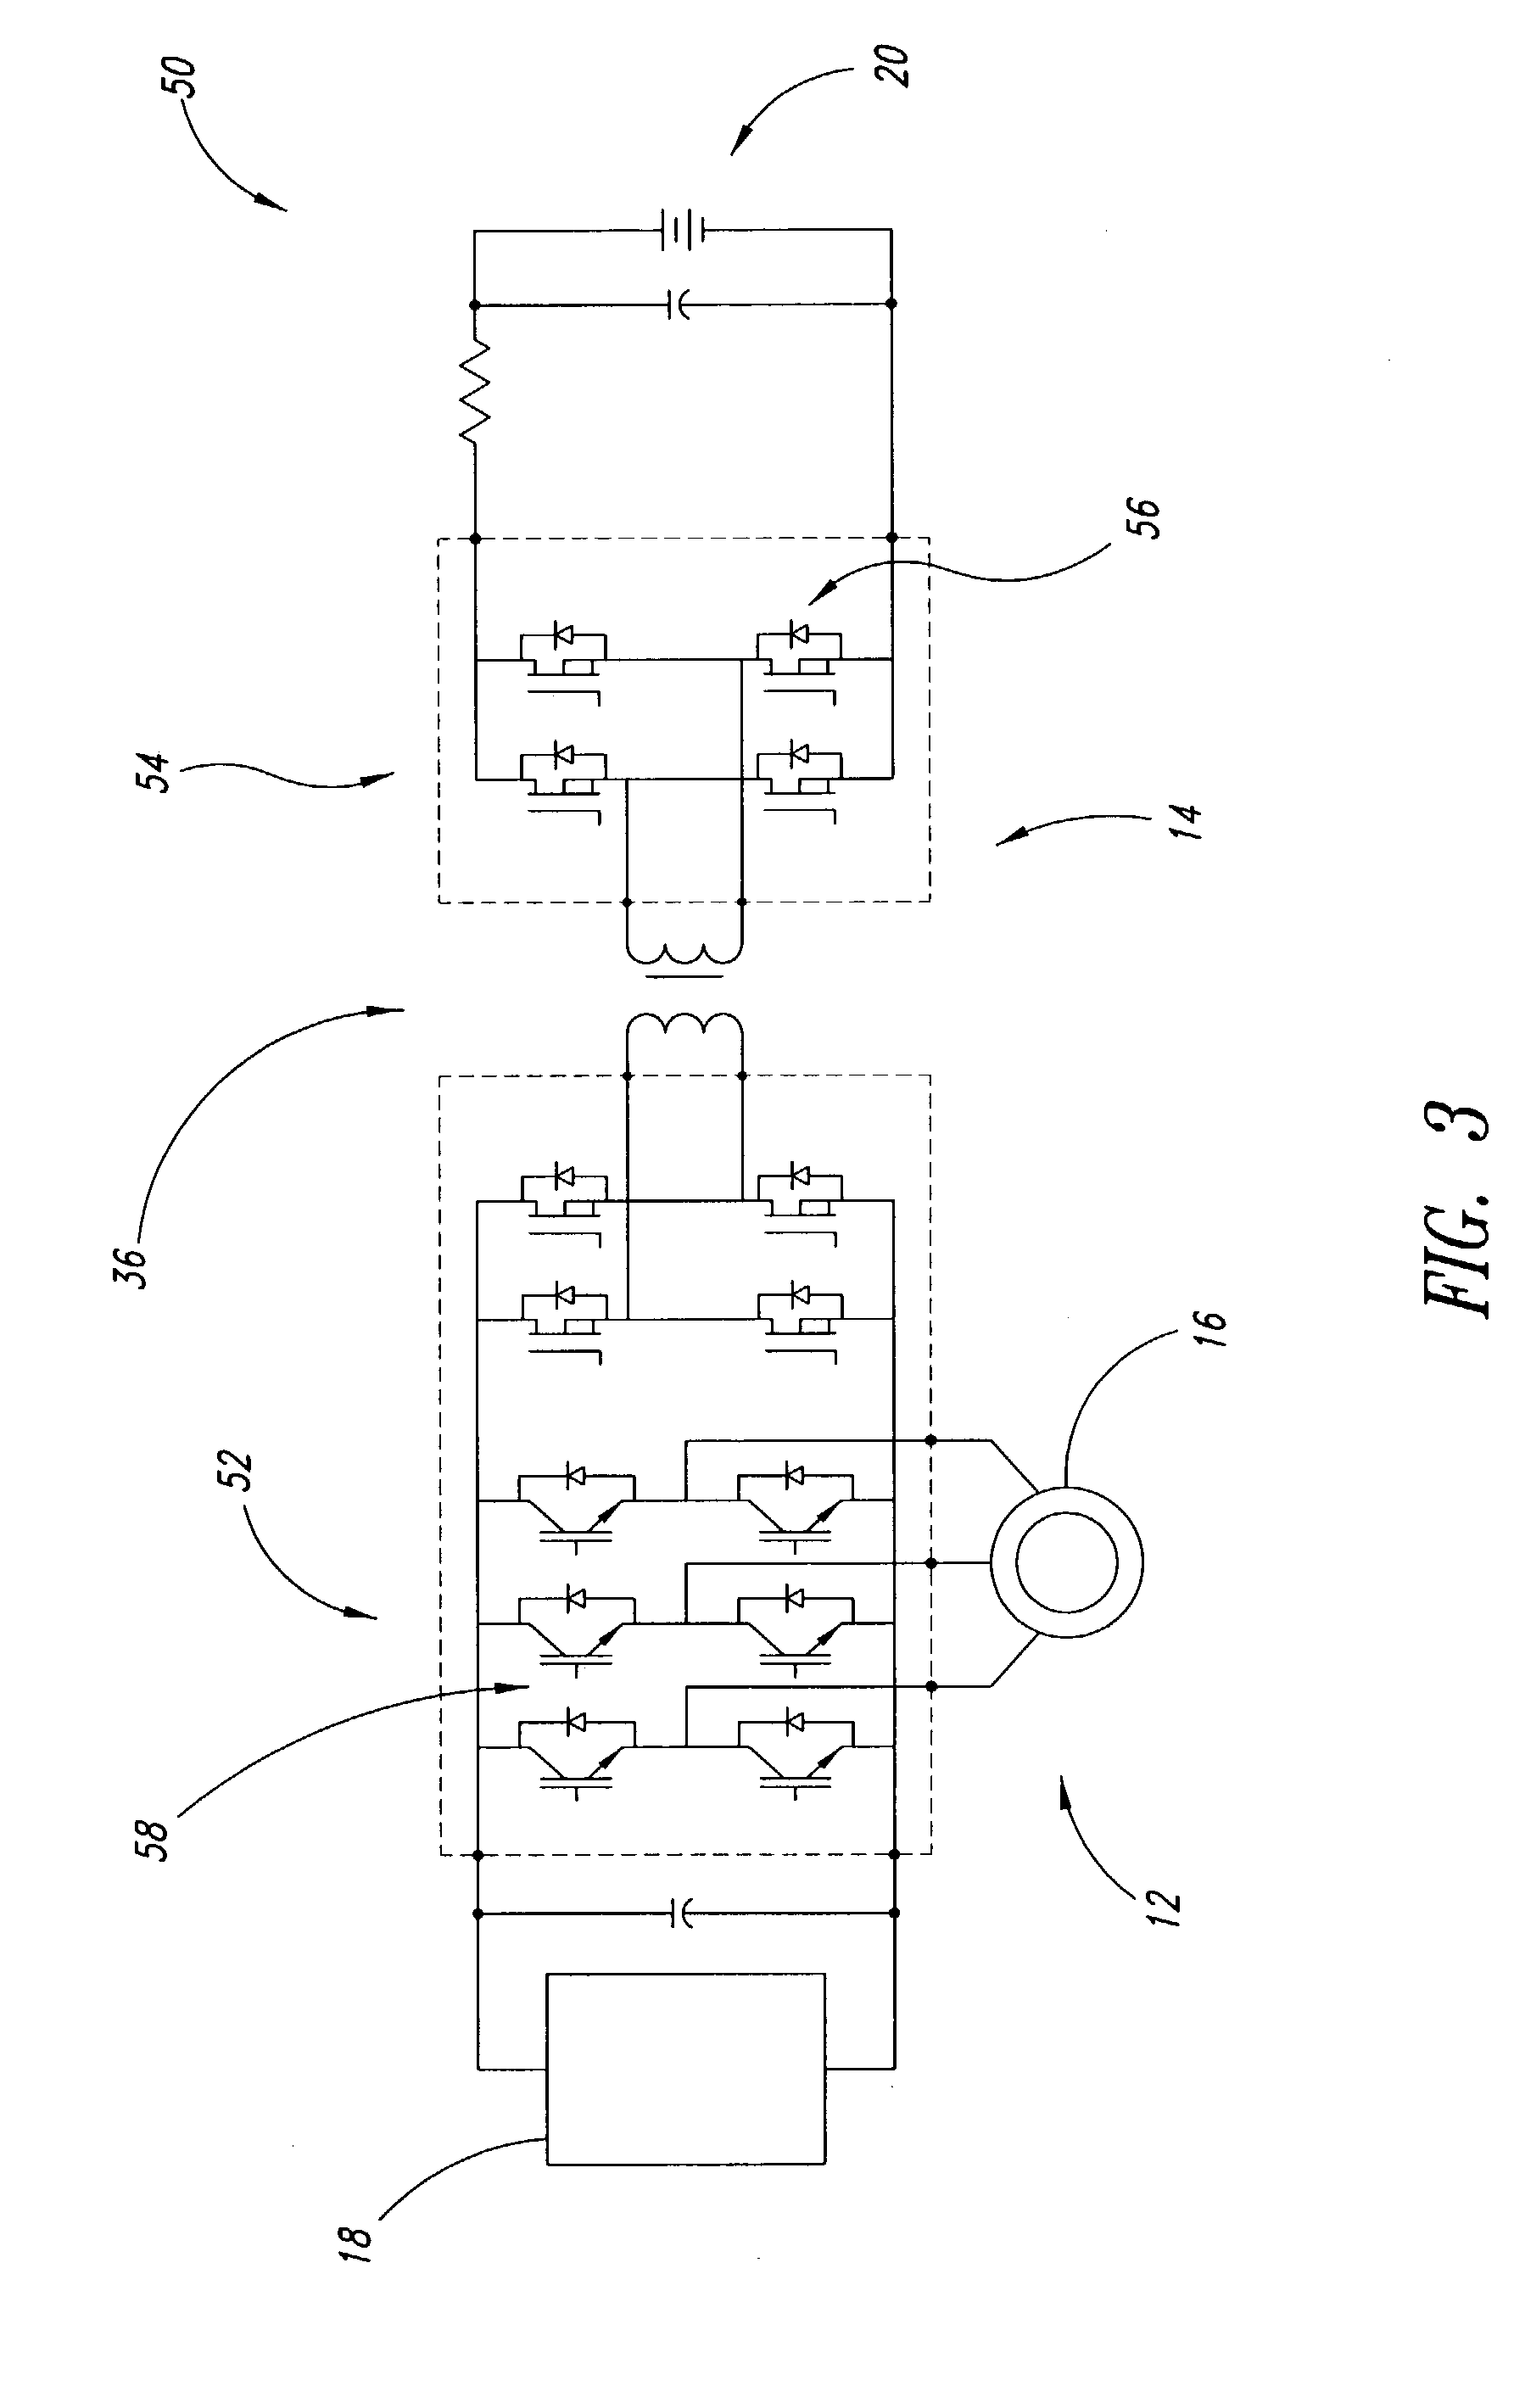 Integrated traction inverter module and DC/DC converter